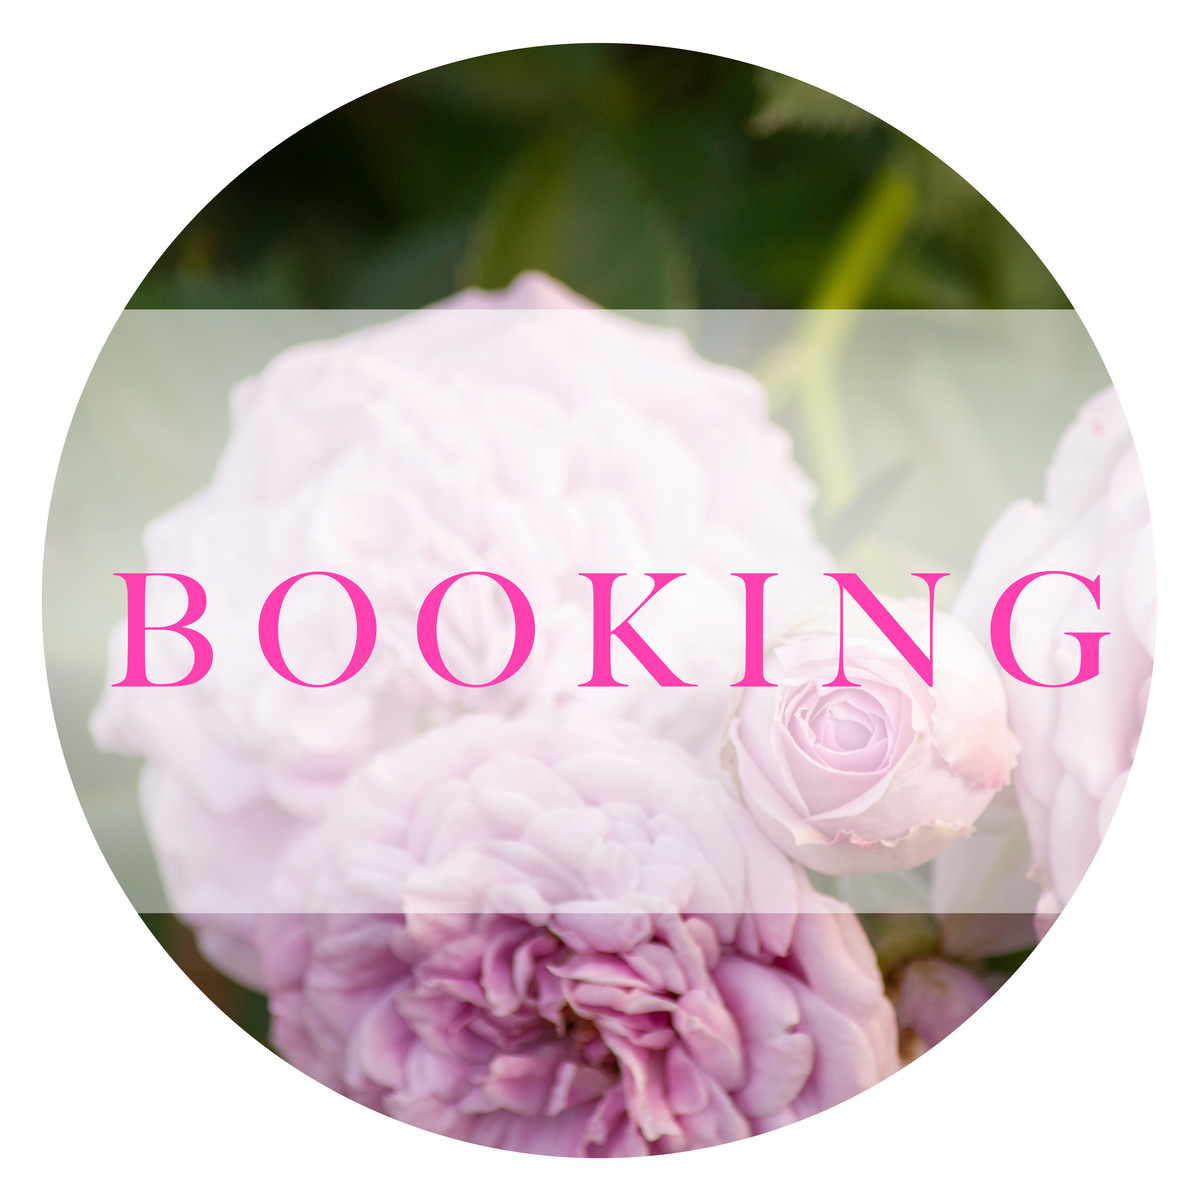 Booking in 